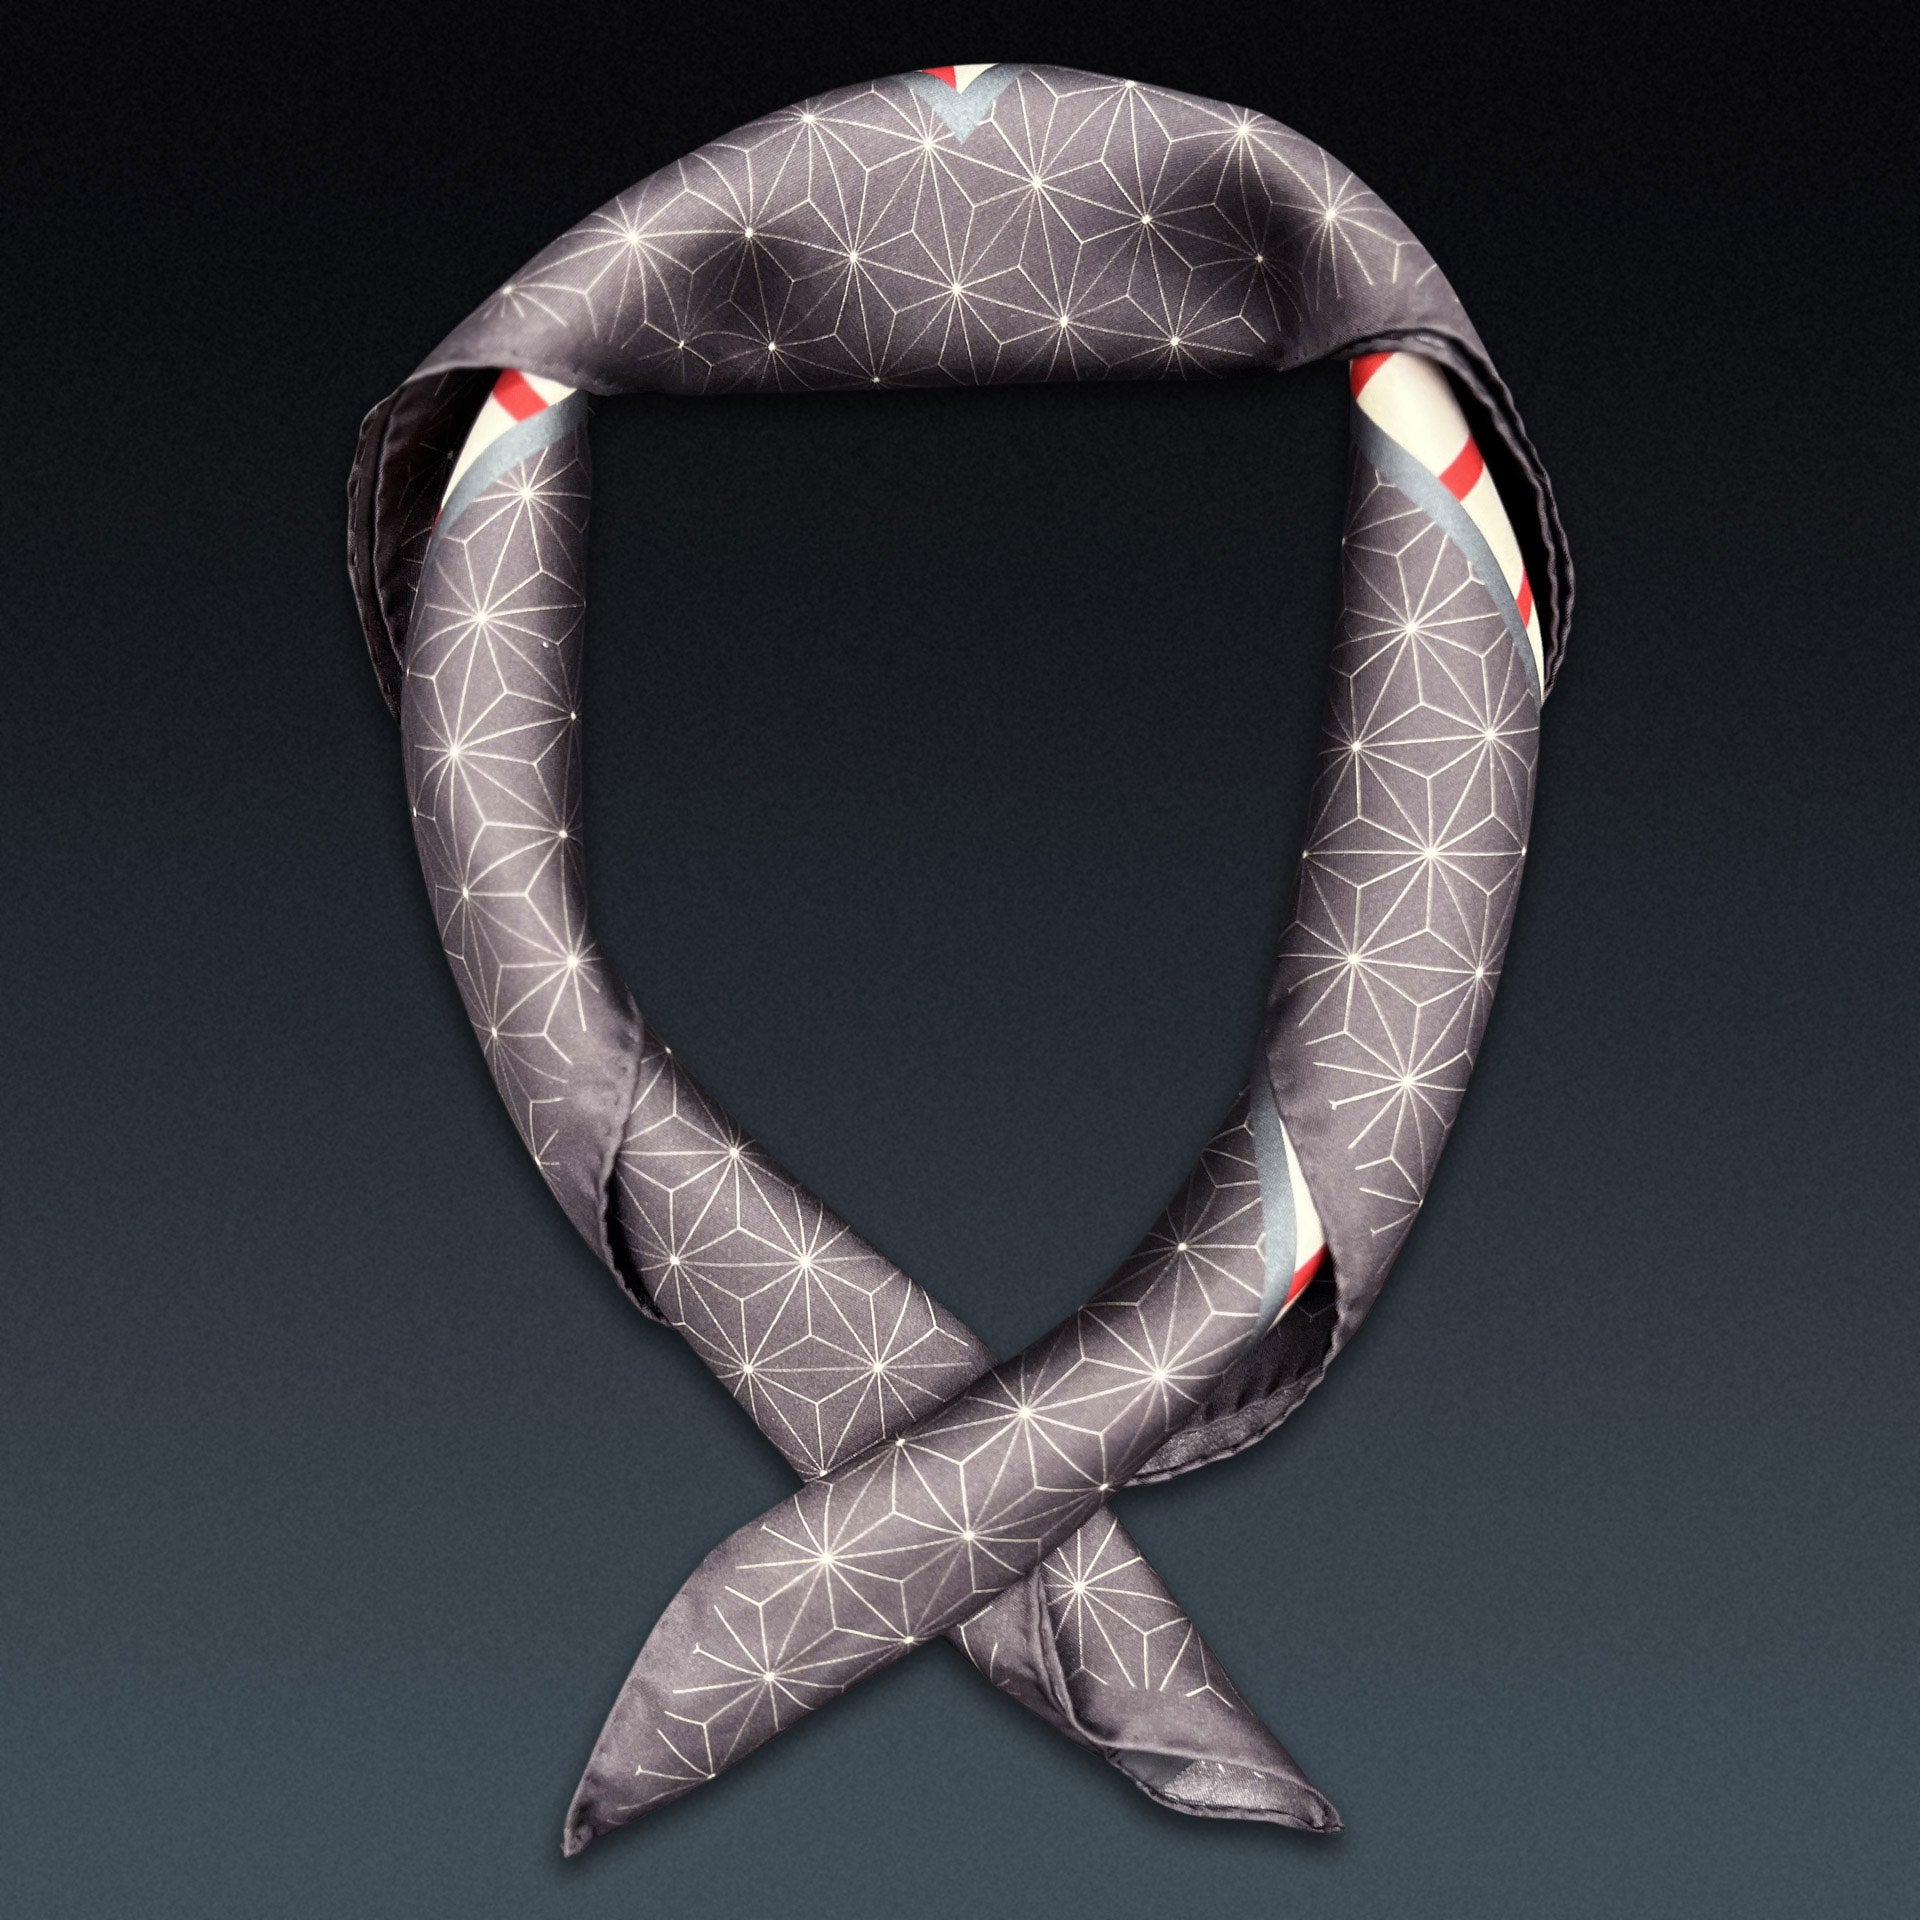 Red starburst 'Sun' neckerchief twisted and curled into a loop on a dark background.